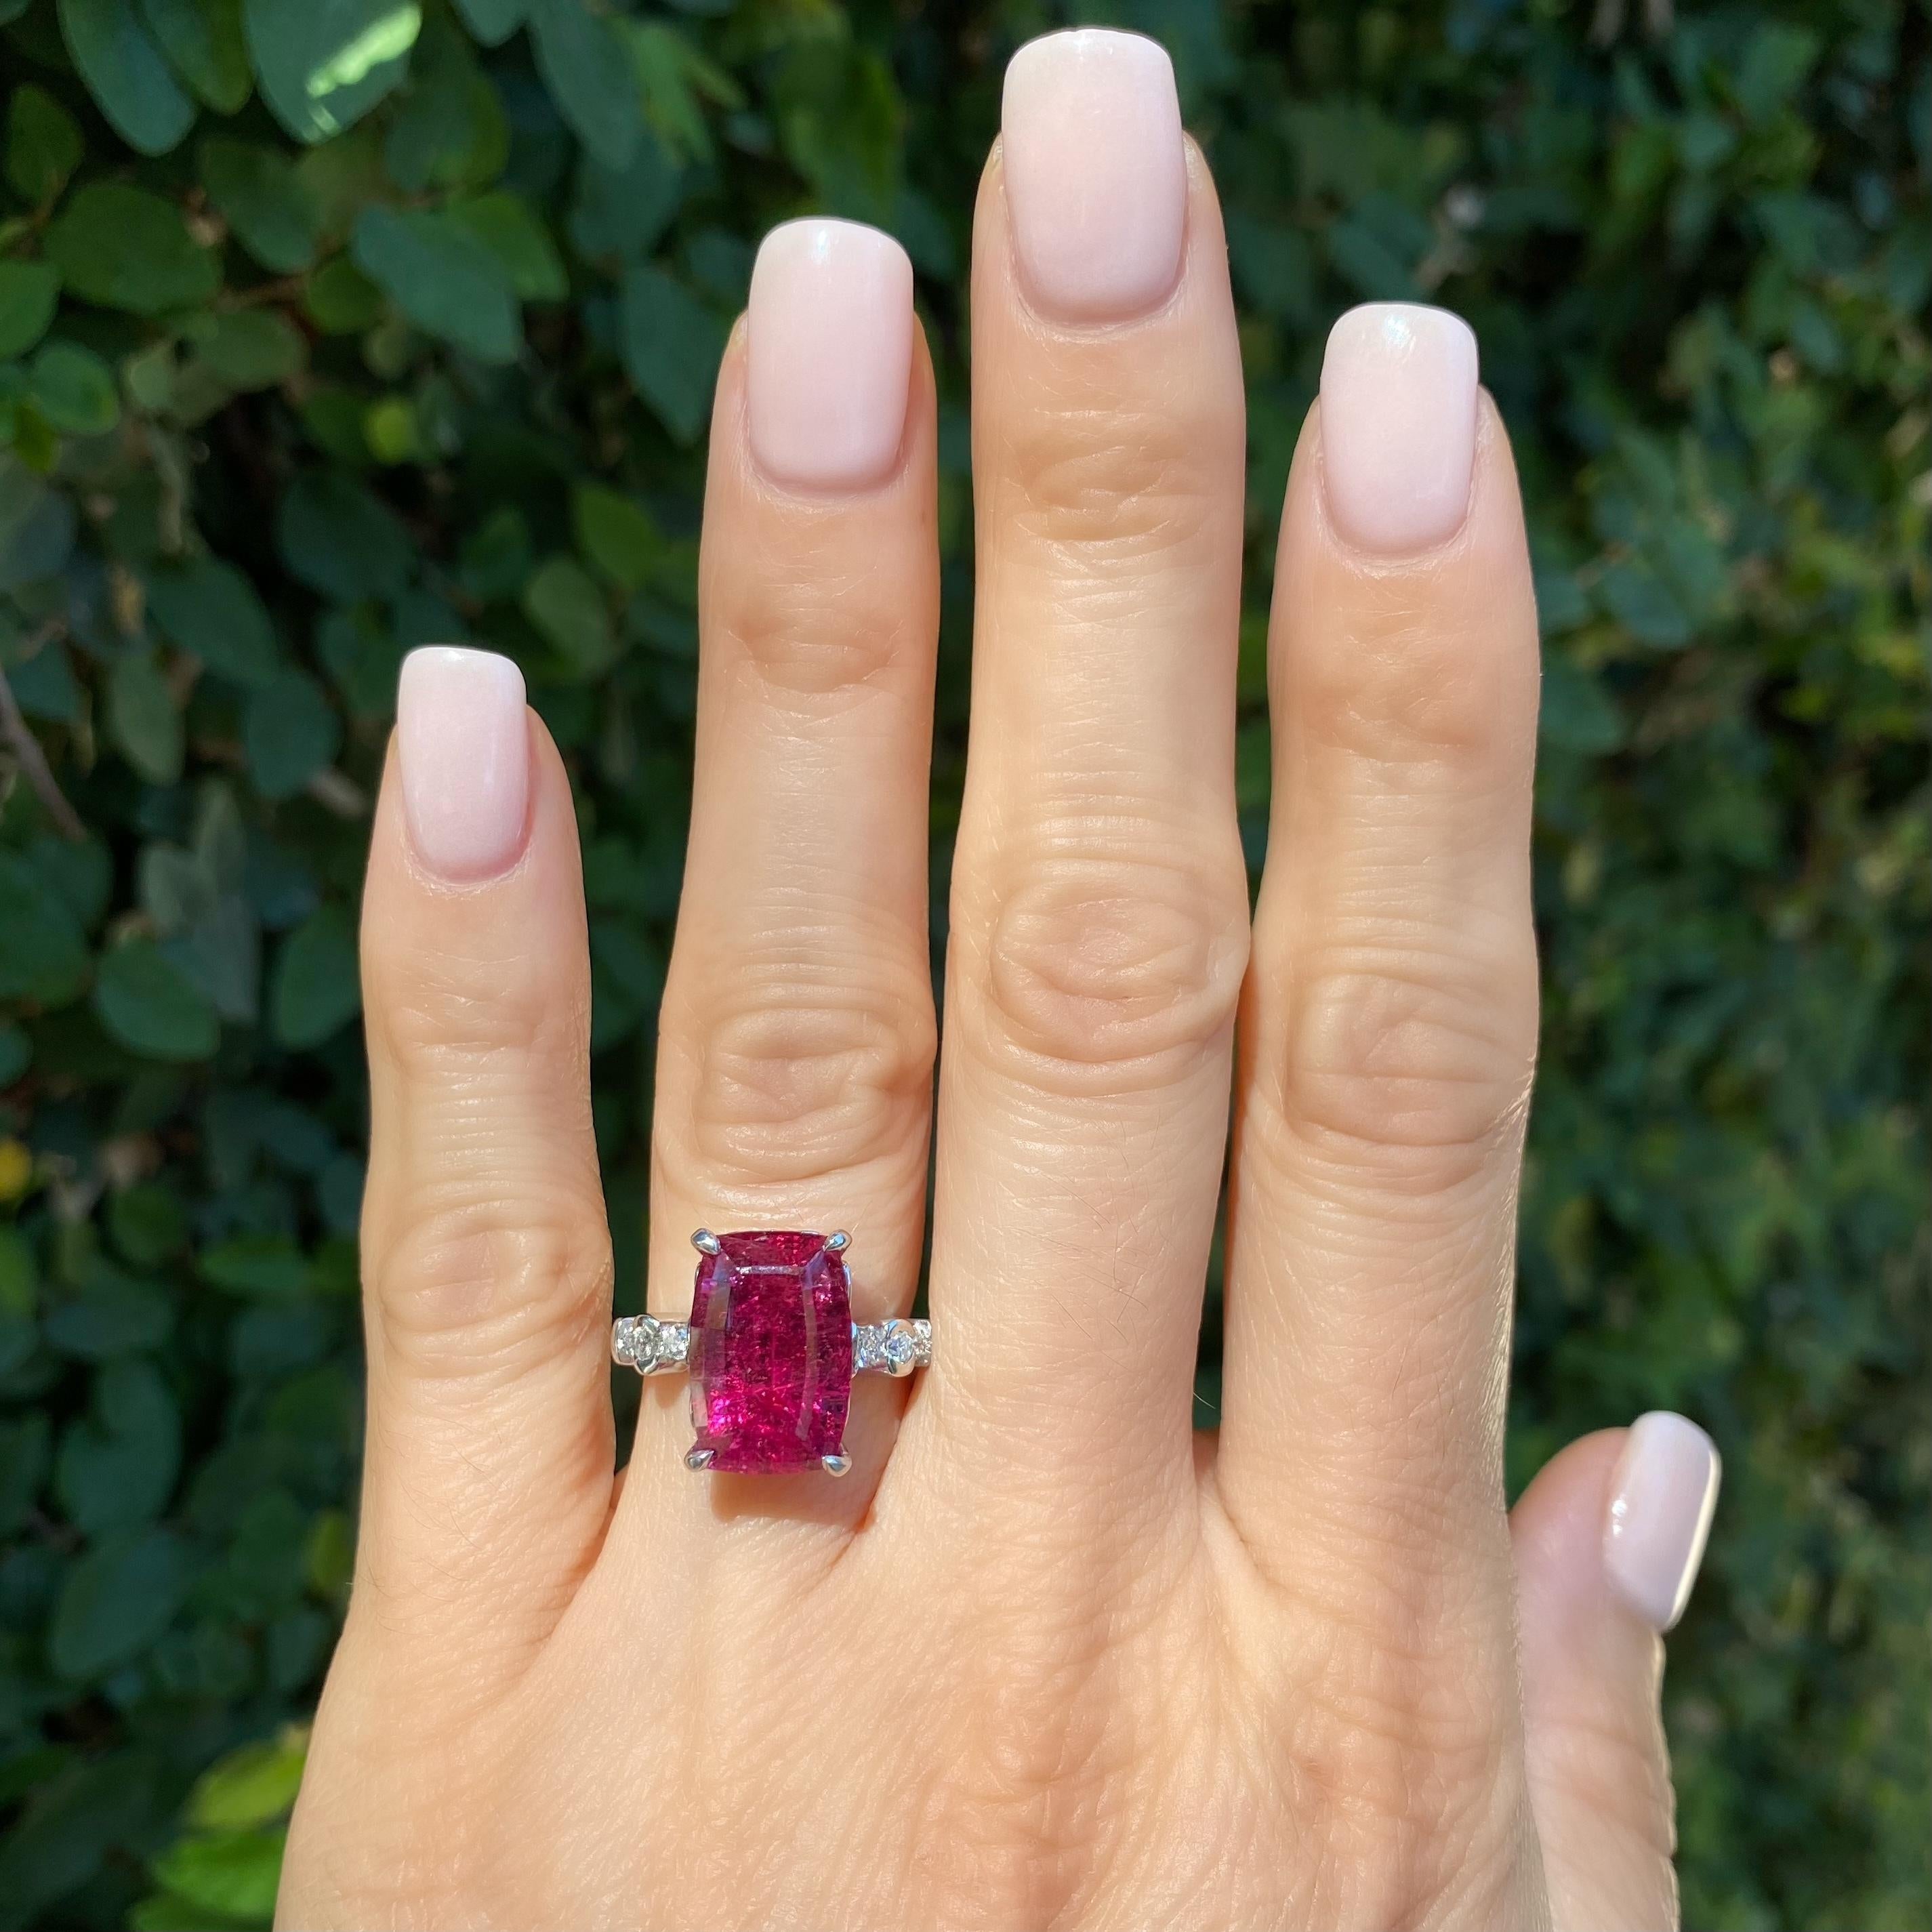 Awesome Fancy Raspberry Red Rubelite Tourmaline and Diamond Platinum Ring. Center Hand set with a securely nestled, rectangular 7.77 Carat Rubelite Tourmaline, accented by 6 round brilliant cut Diamonds, approx. 0.28tcw. Dimensions: 0.81”w x 0.57”h